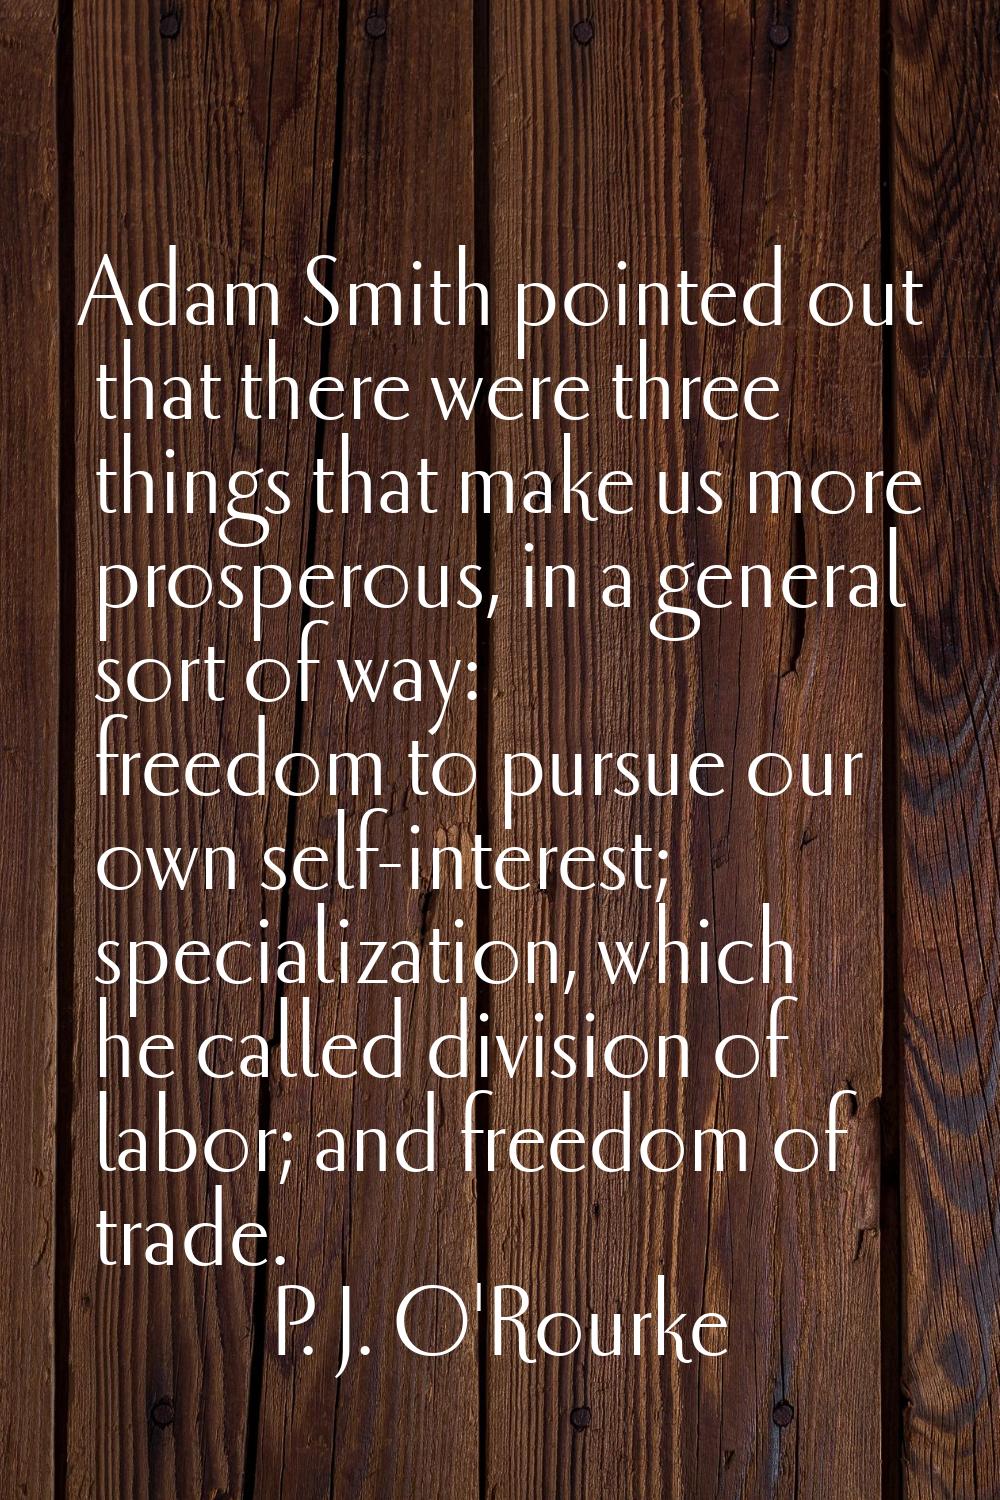 Adam Smith pointed out that there were three things that make us more prosperous, in a general sort